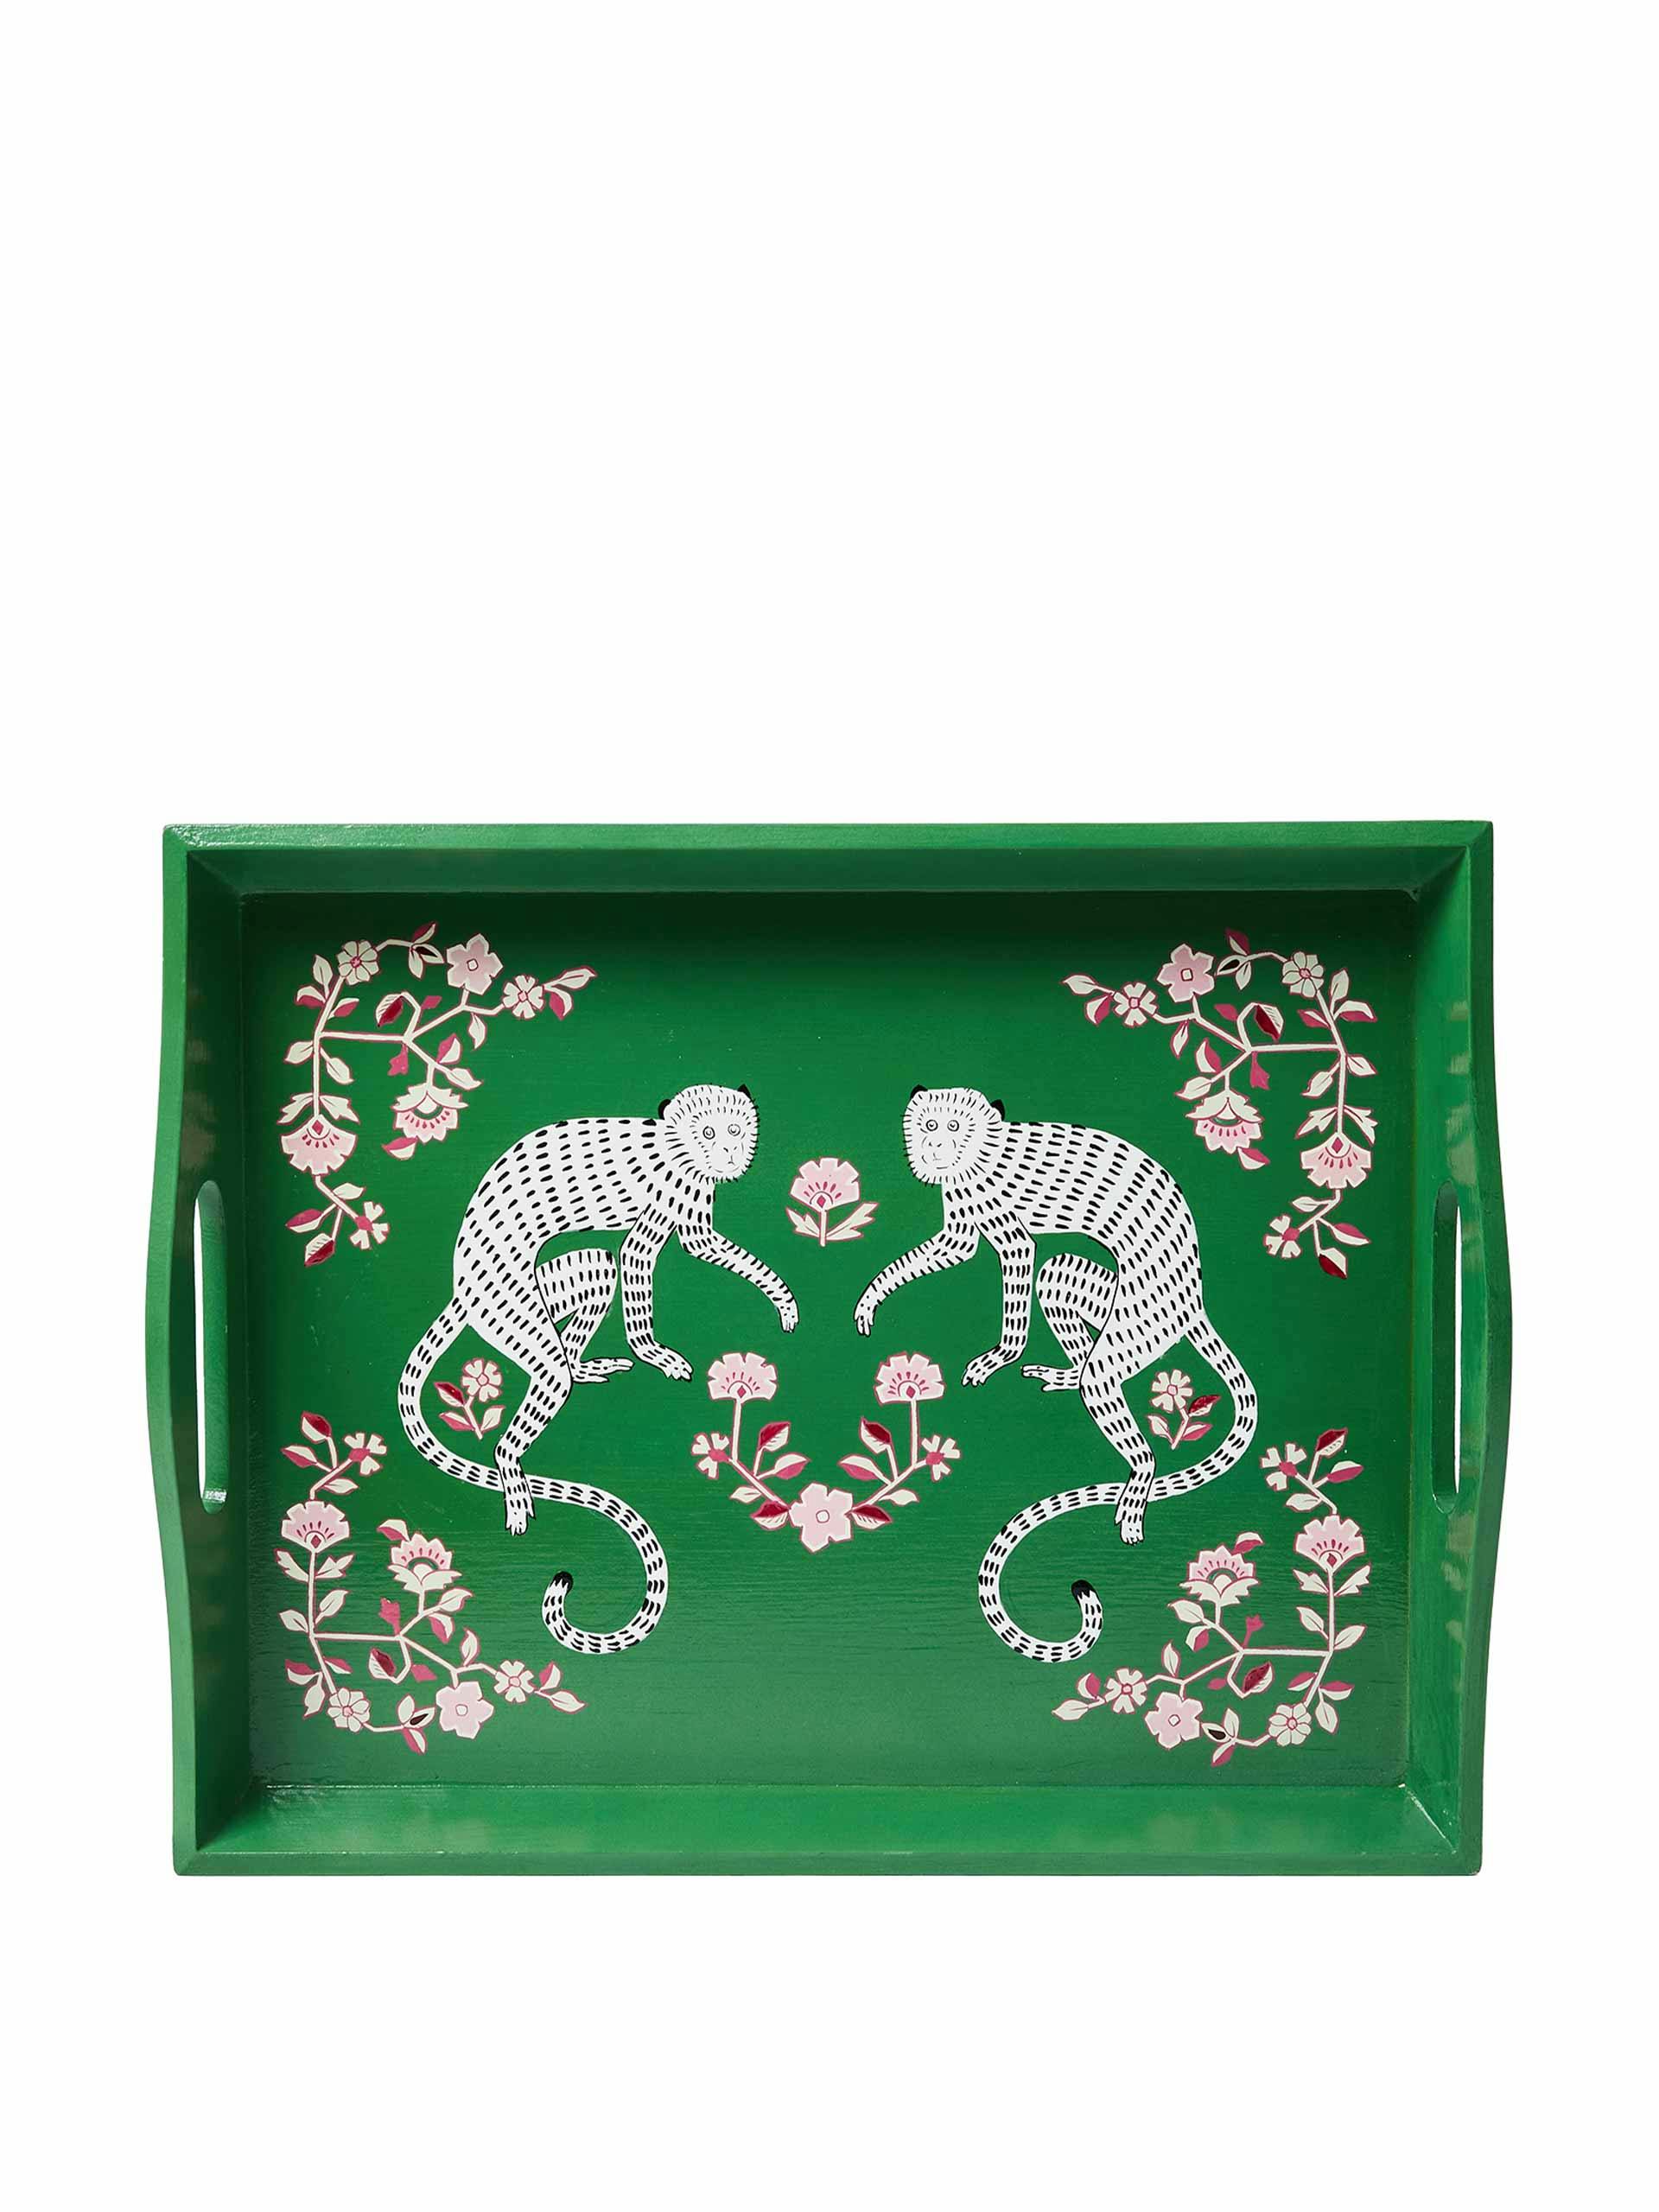 Morris The Monkey green hand-painted tray